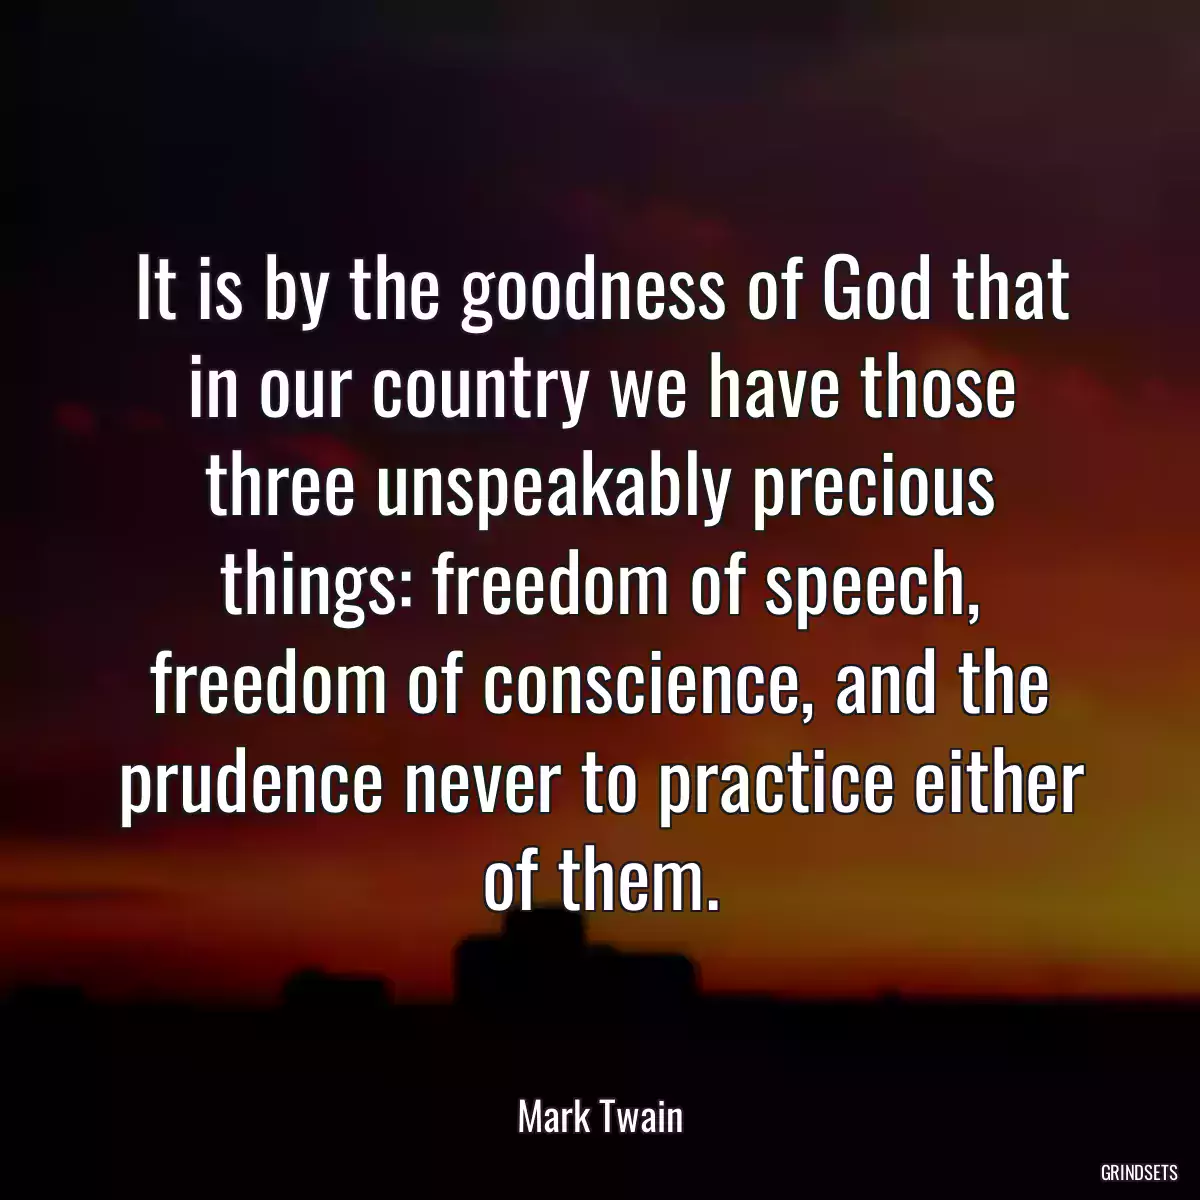 It is by the goodness of God that in our country we have those three unspeakably precious things: freedom of speech, freedom of conscience, and the prudence never to practice either of them.